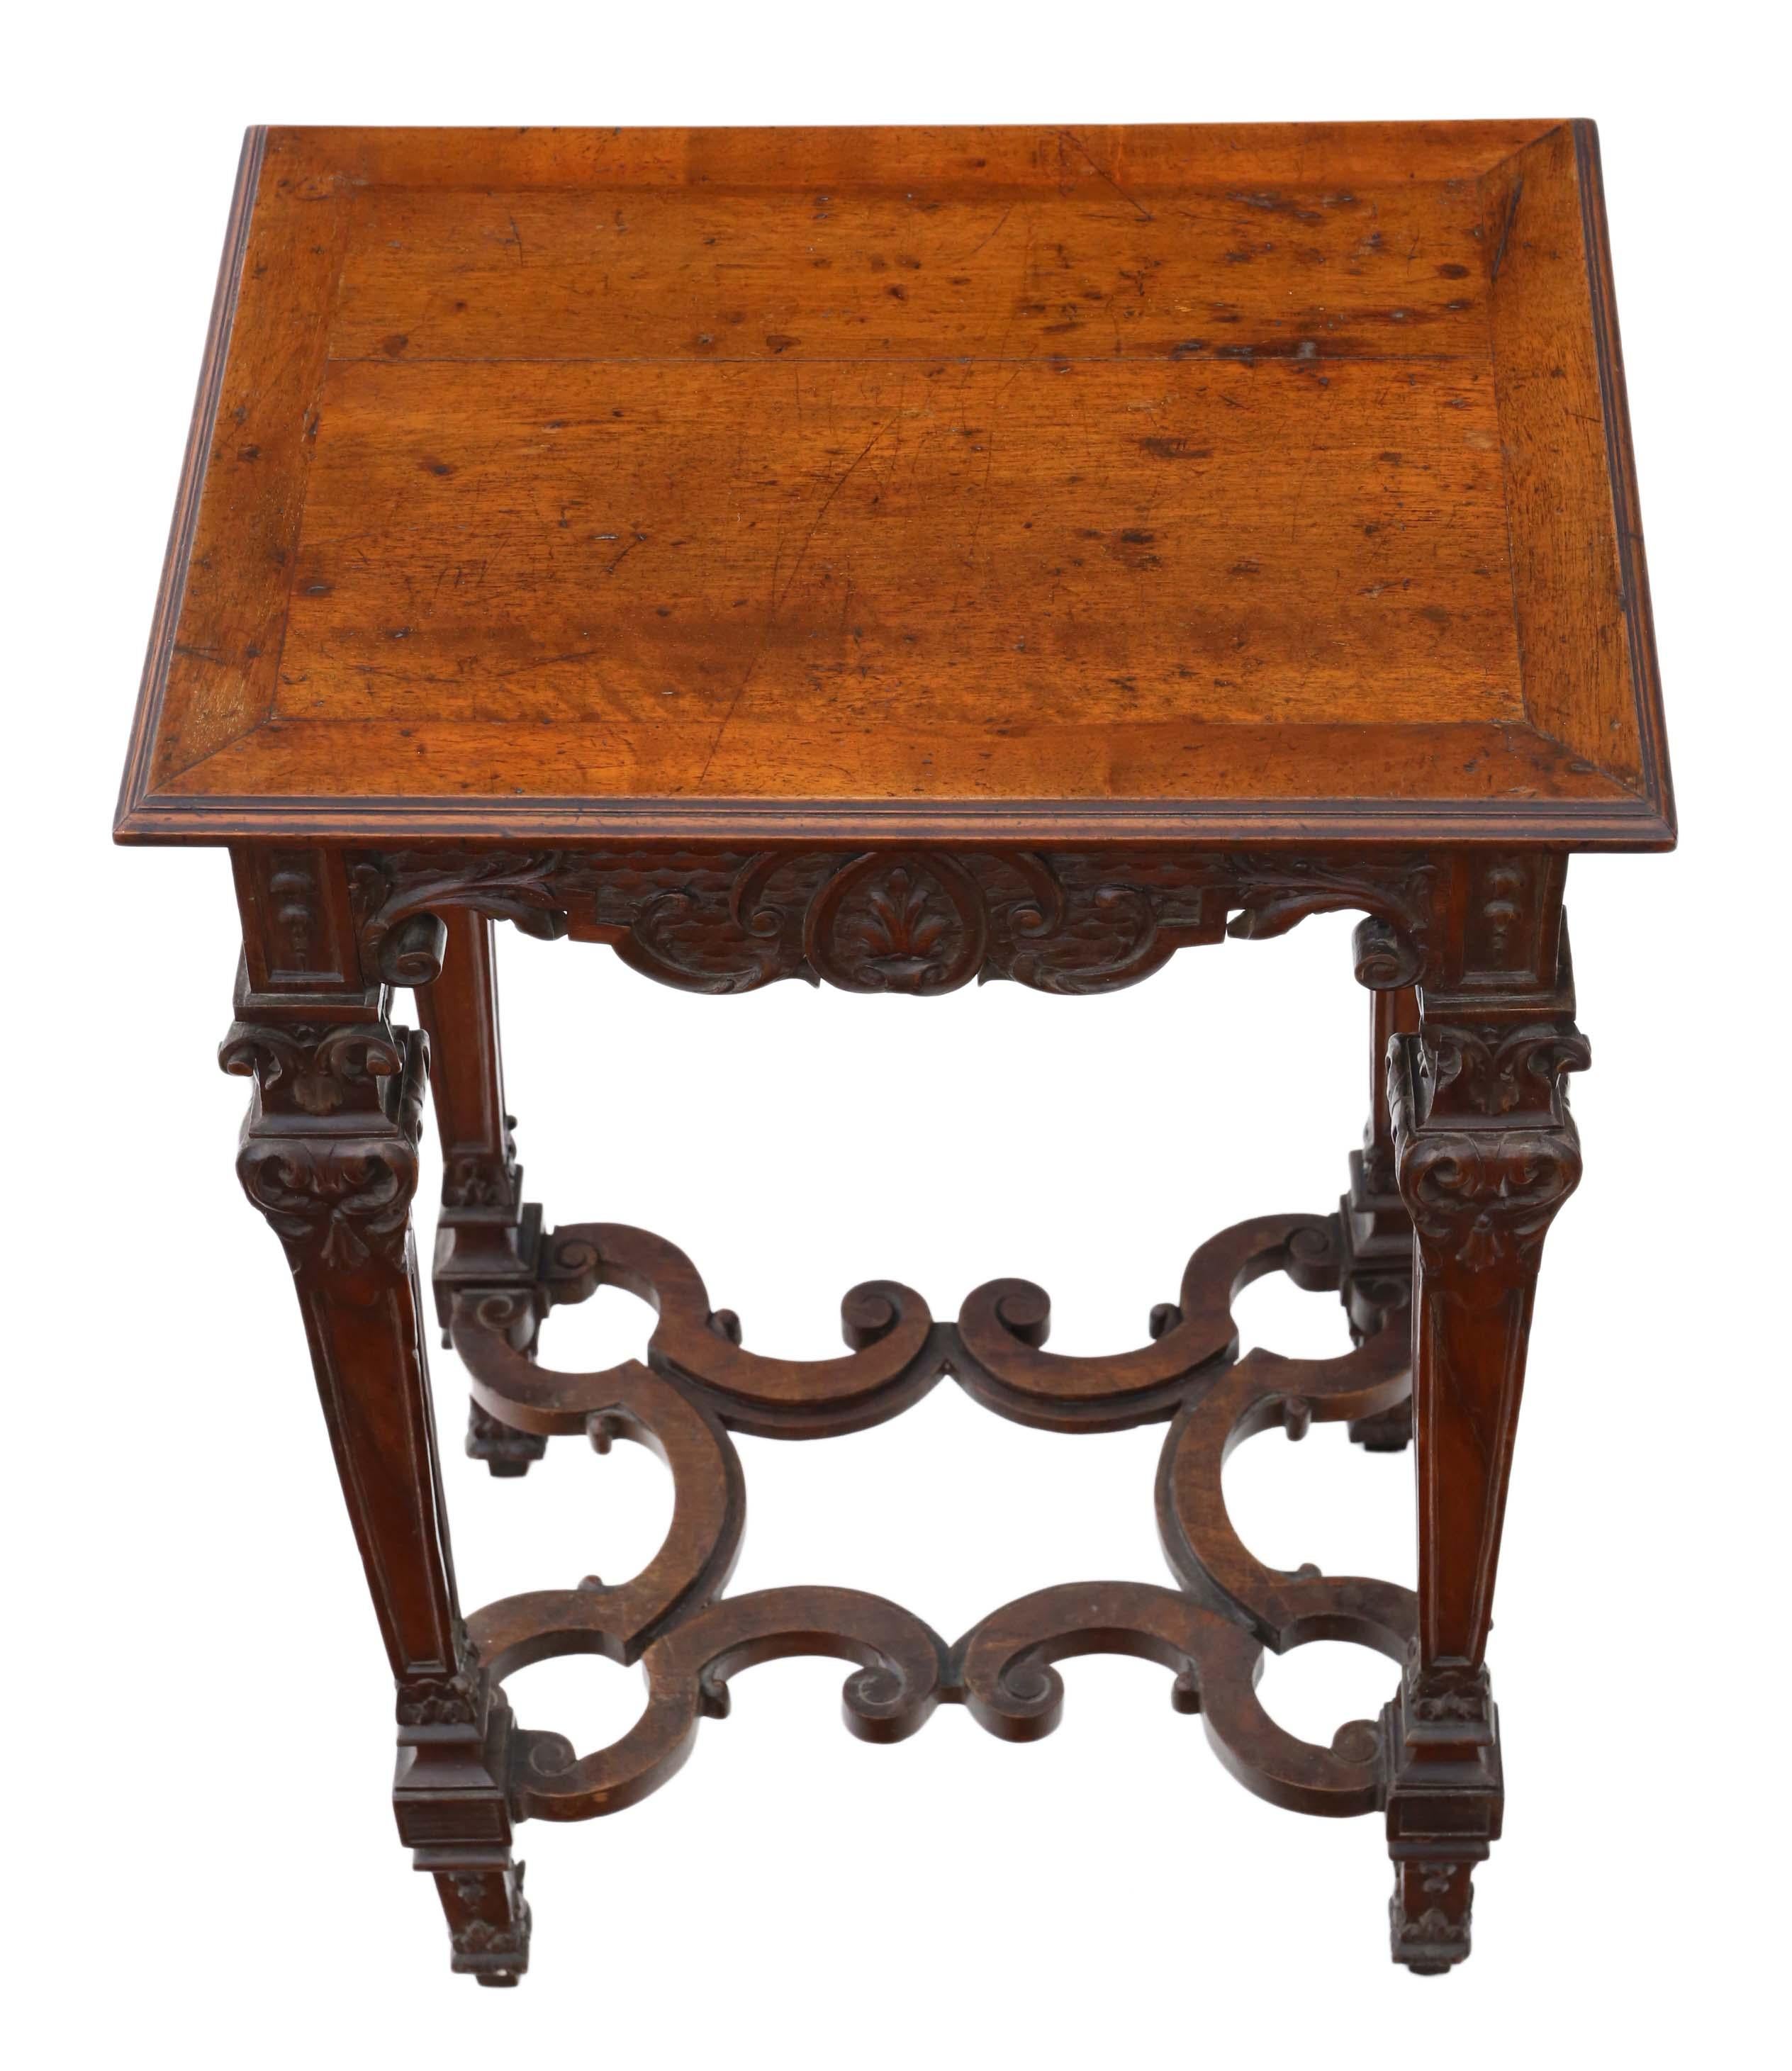 Antique Victorian Gothic quality carved walnut wine, side or occasional table, circa 1860.
Solid with no loose joints. Full of age, character and charm. No woodworm.
A rare attractive table.
Would look great in the right location!
Overall